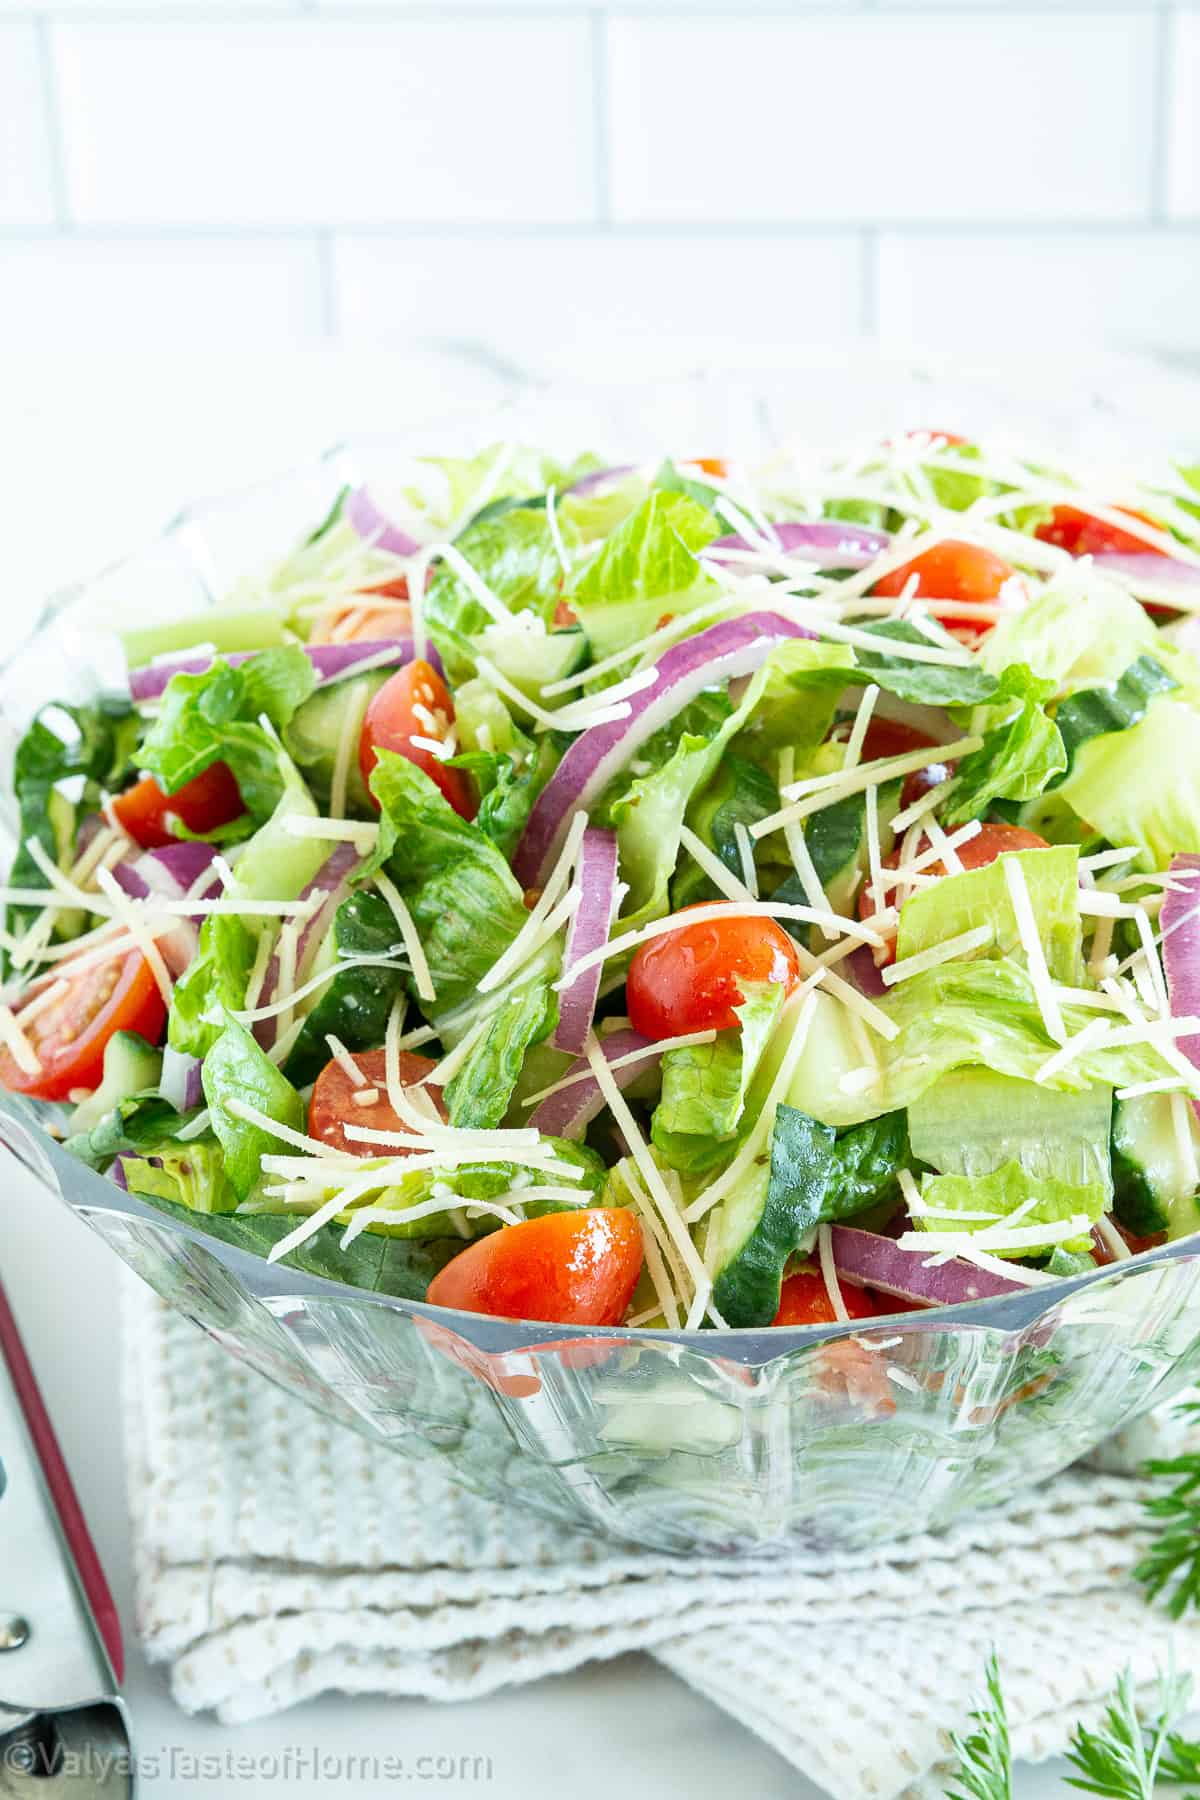 With the wide variety of rich flavored dishes, this salad is very refreshing and offsets some of the flavors.